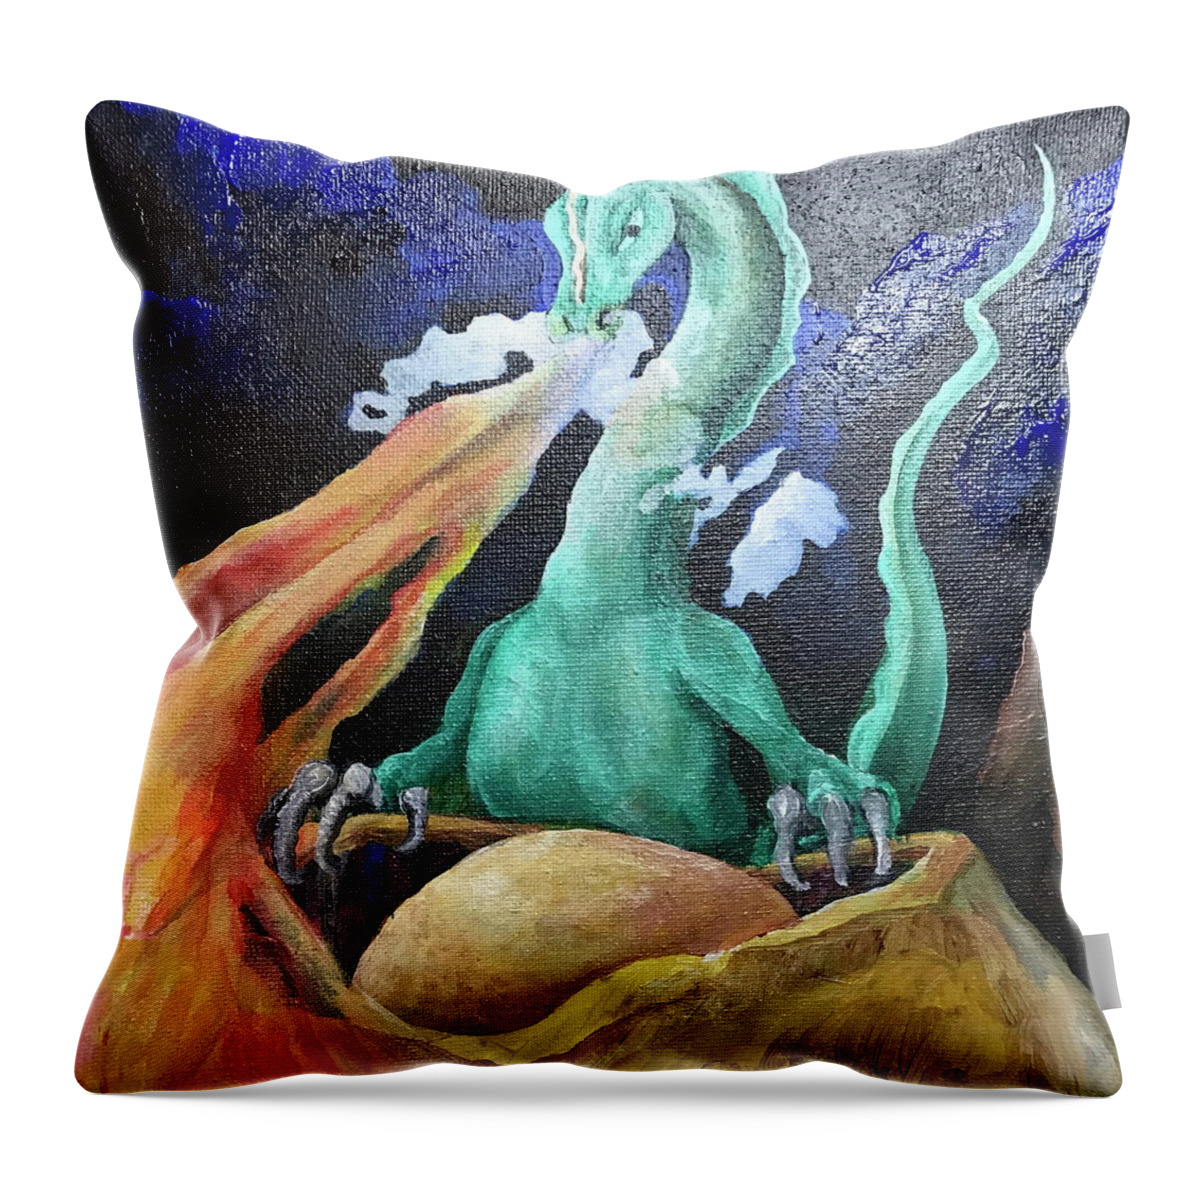 Dragon Throw Pillow featuring the painting Dragon tending egg by Teresamarie Yawn